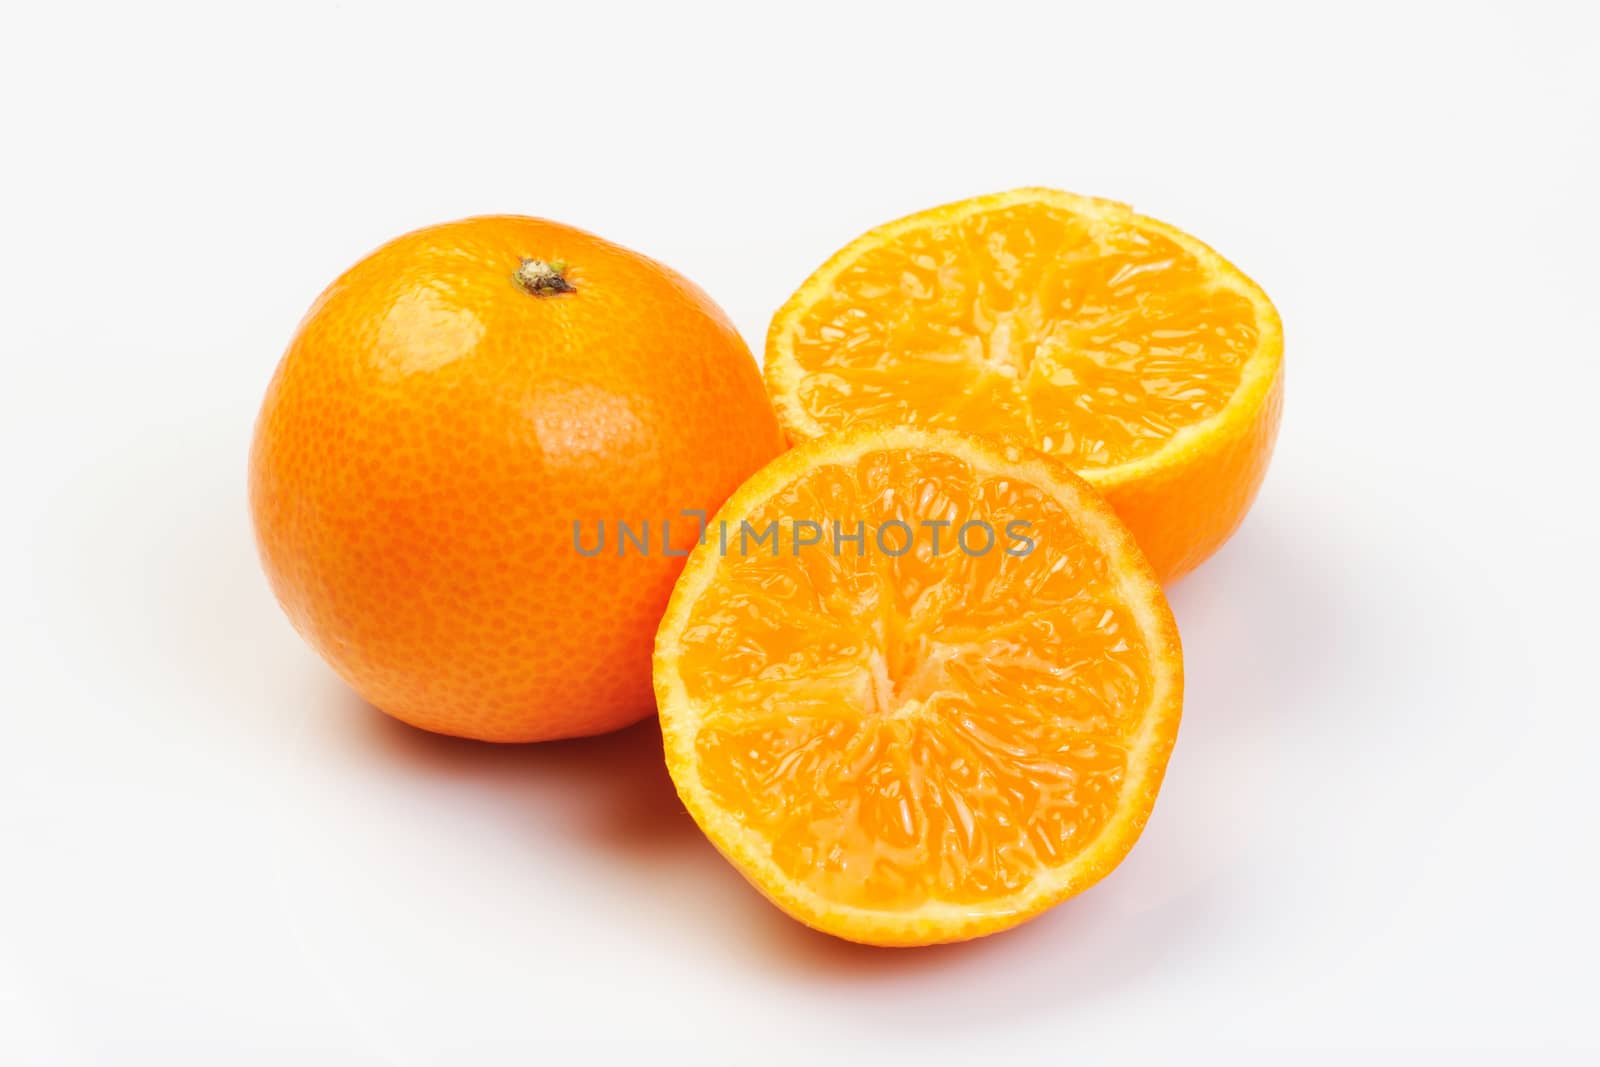 Mandarines in whit background cuted on half